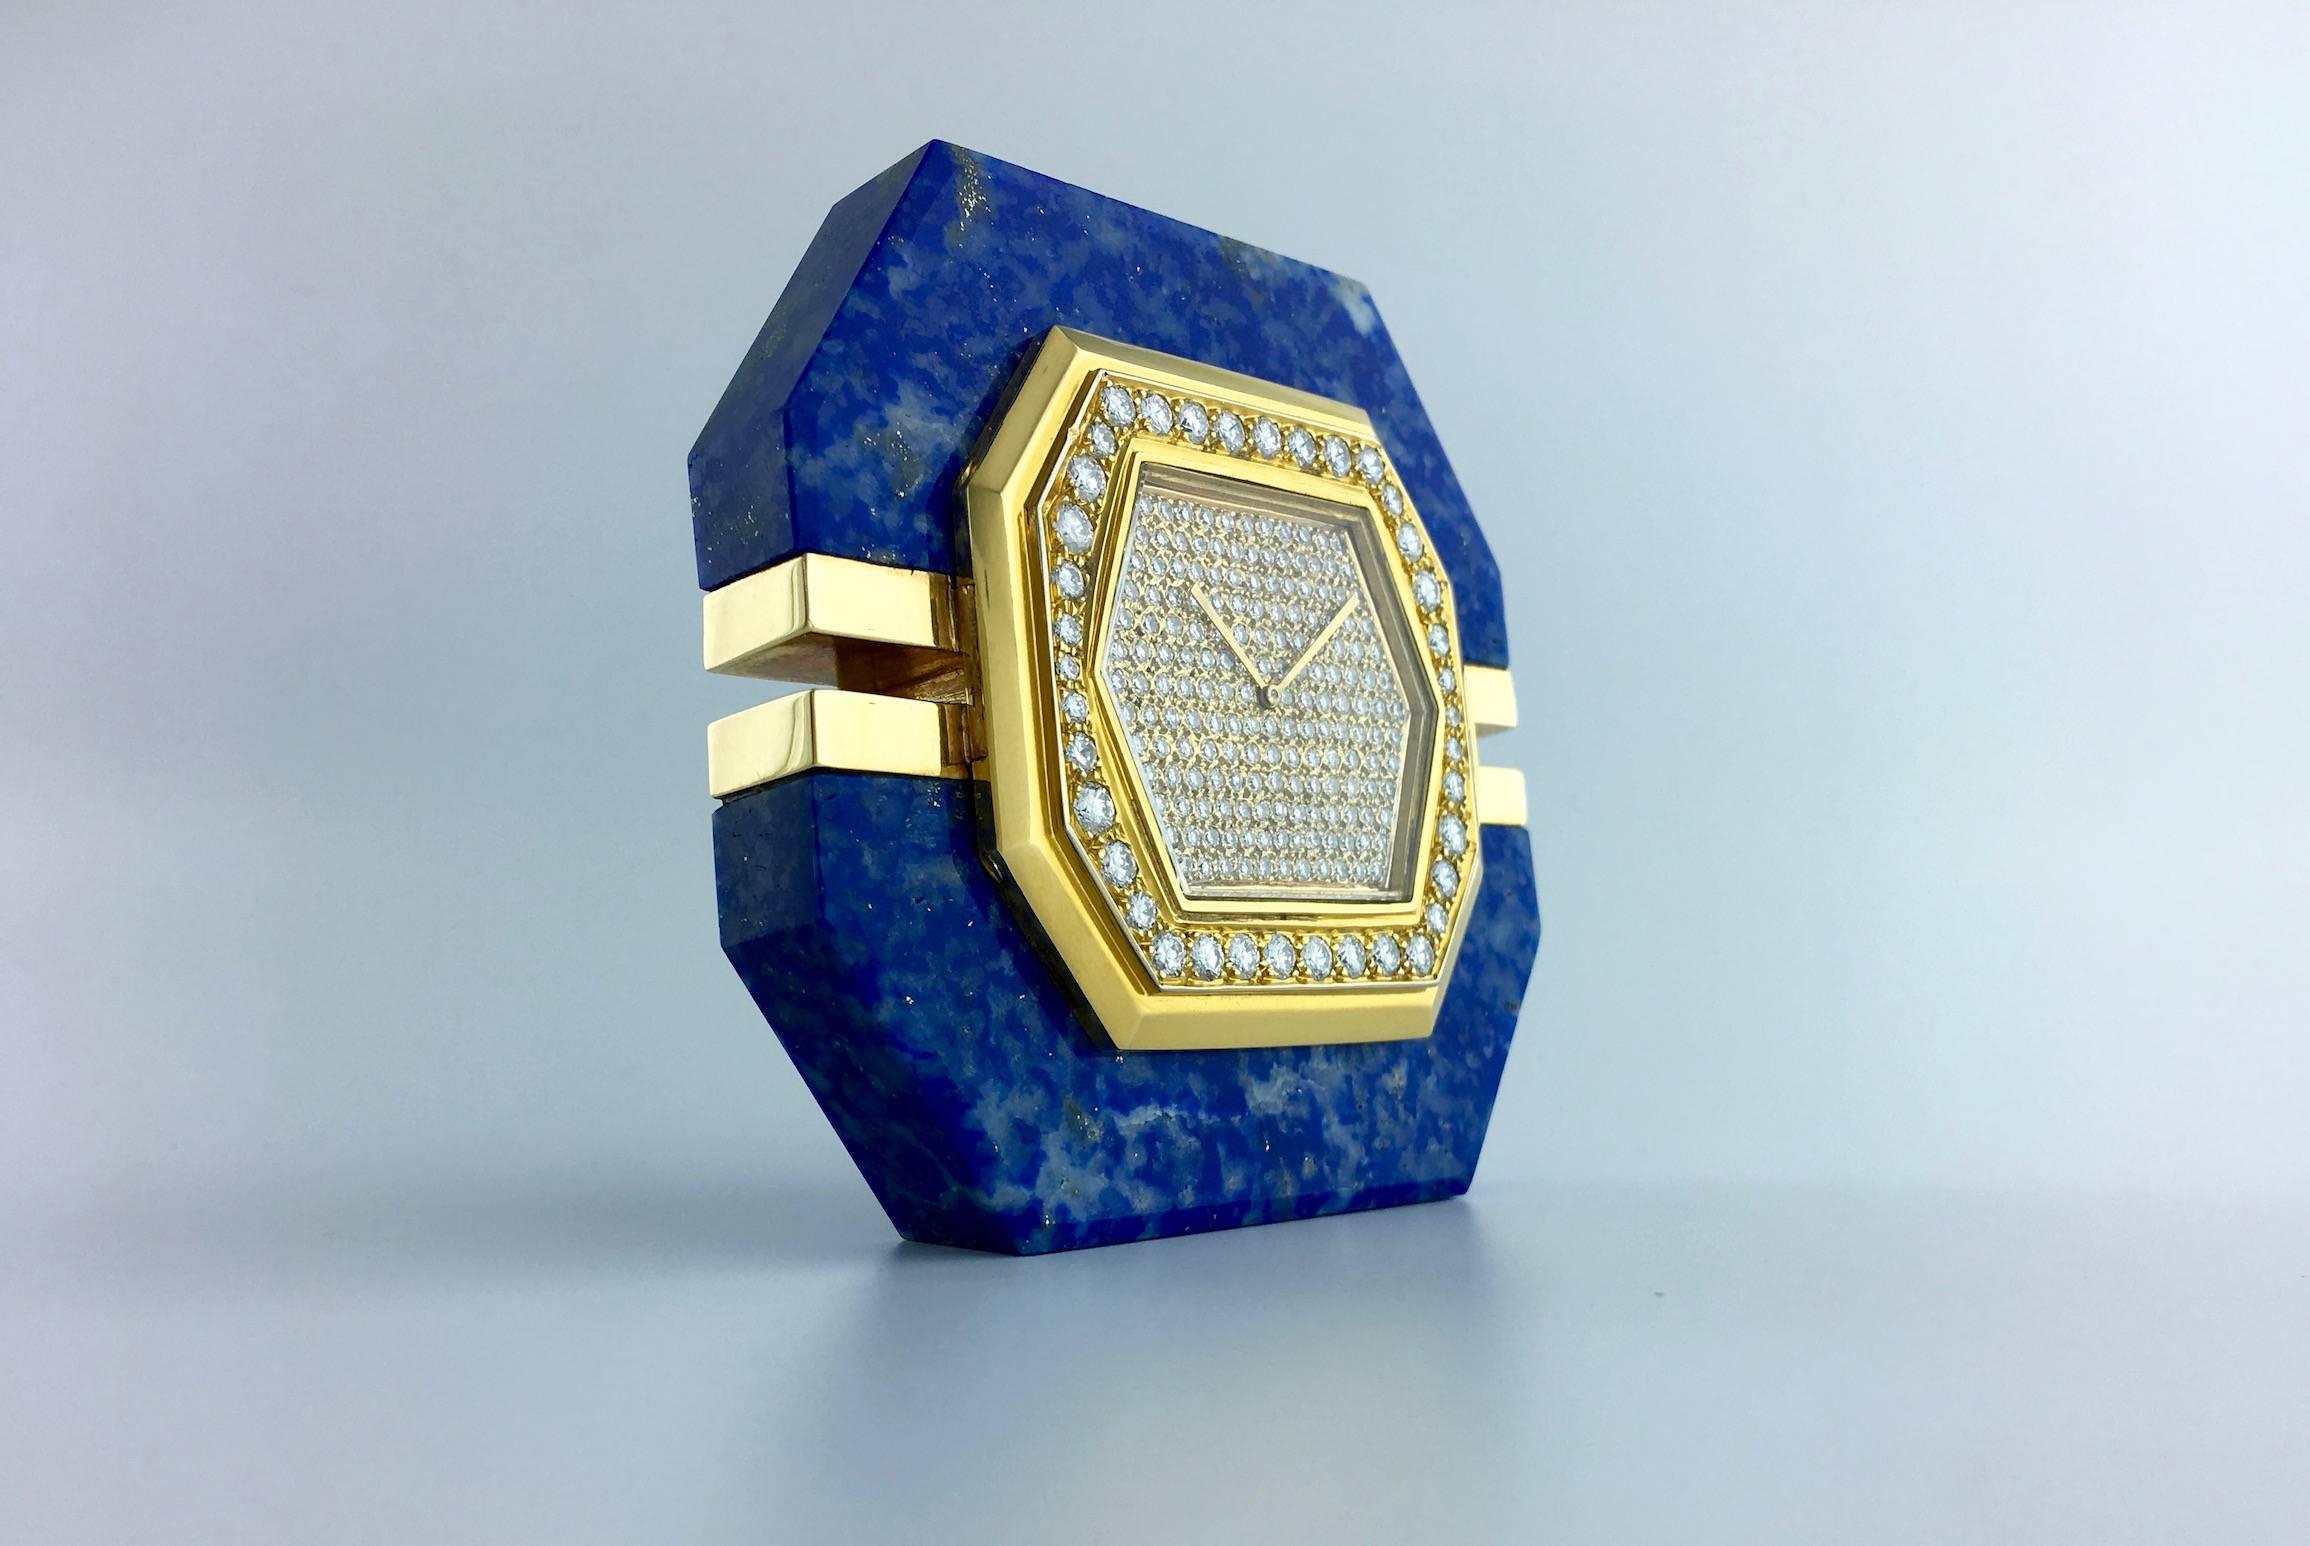 This Small Clock is striking by the shape and color combination.
Circa 1980 reminding Art Deco geometric design the Lapis lazuli is in perfect condition. The Blue is deep Royal. The gold is pave by round cut Diamond (G-H color and Vvs-Vs clarity)